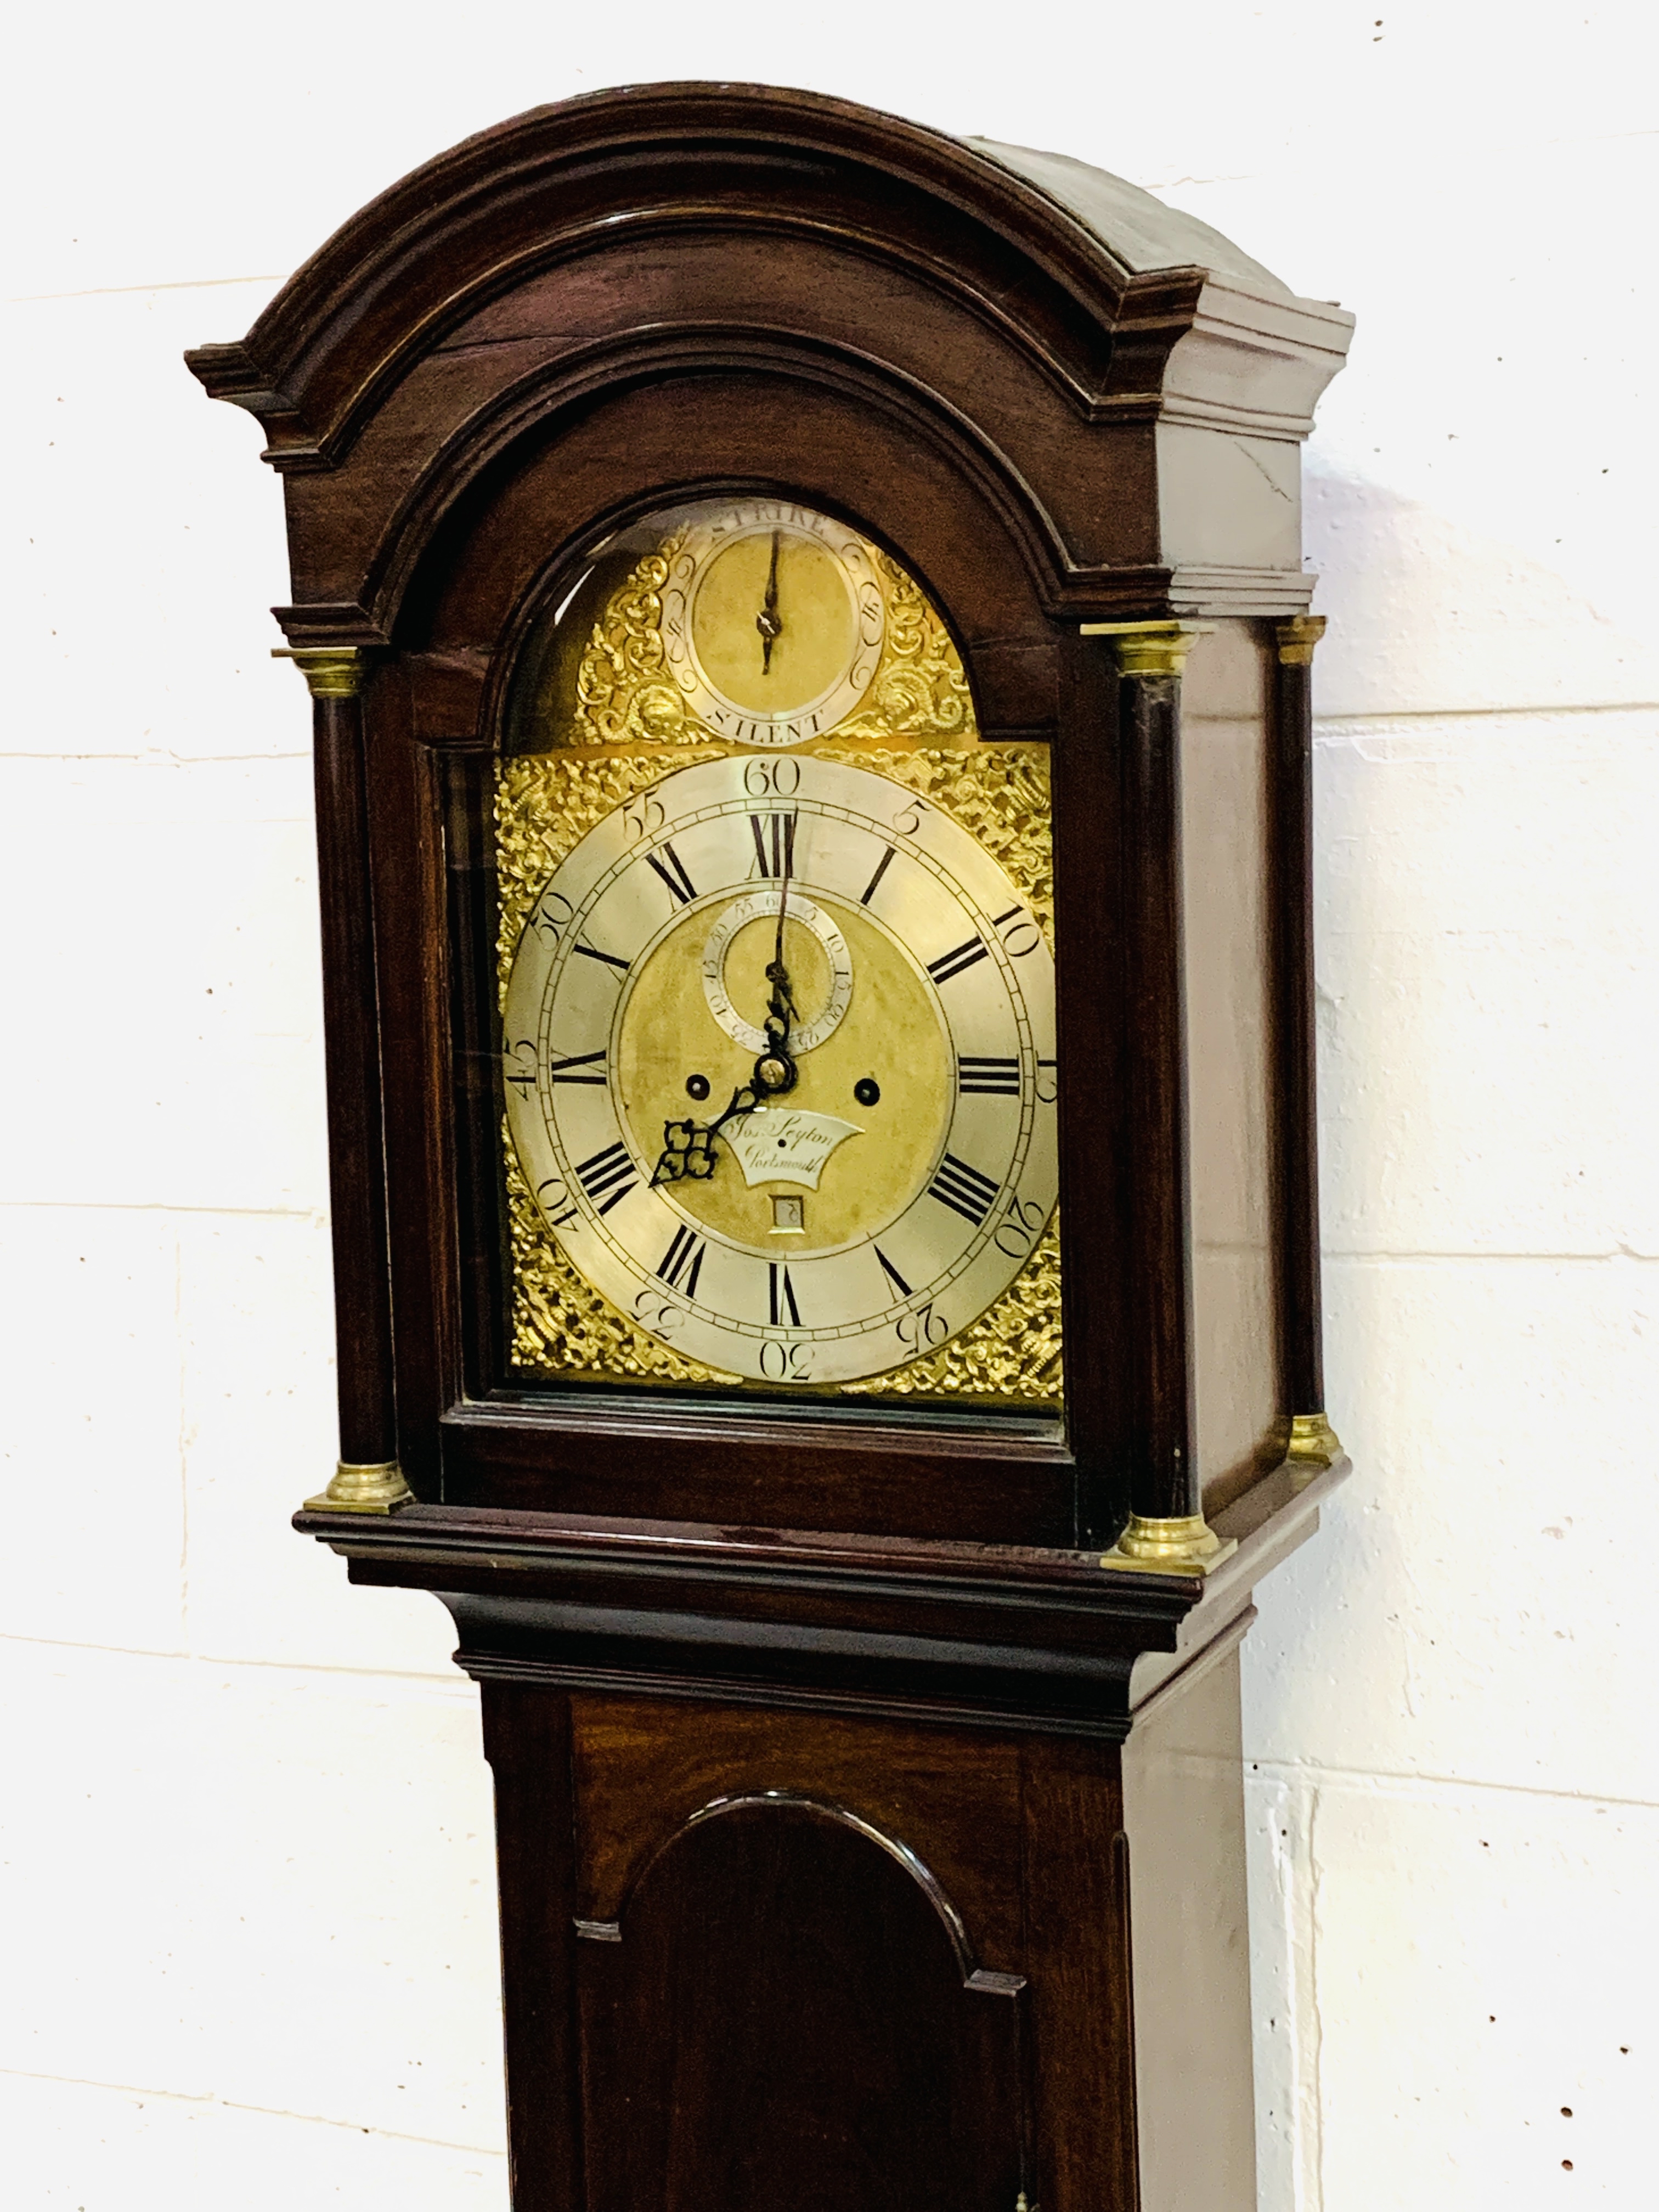 Mahogany long case clock with columned and arched hood by Jos. Leyton of Portsmouth - Image 2 of 9